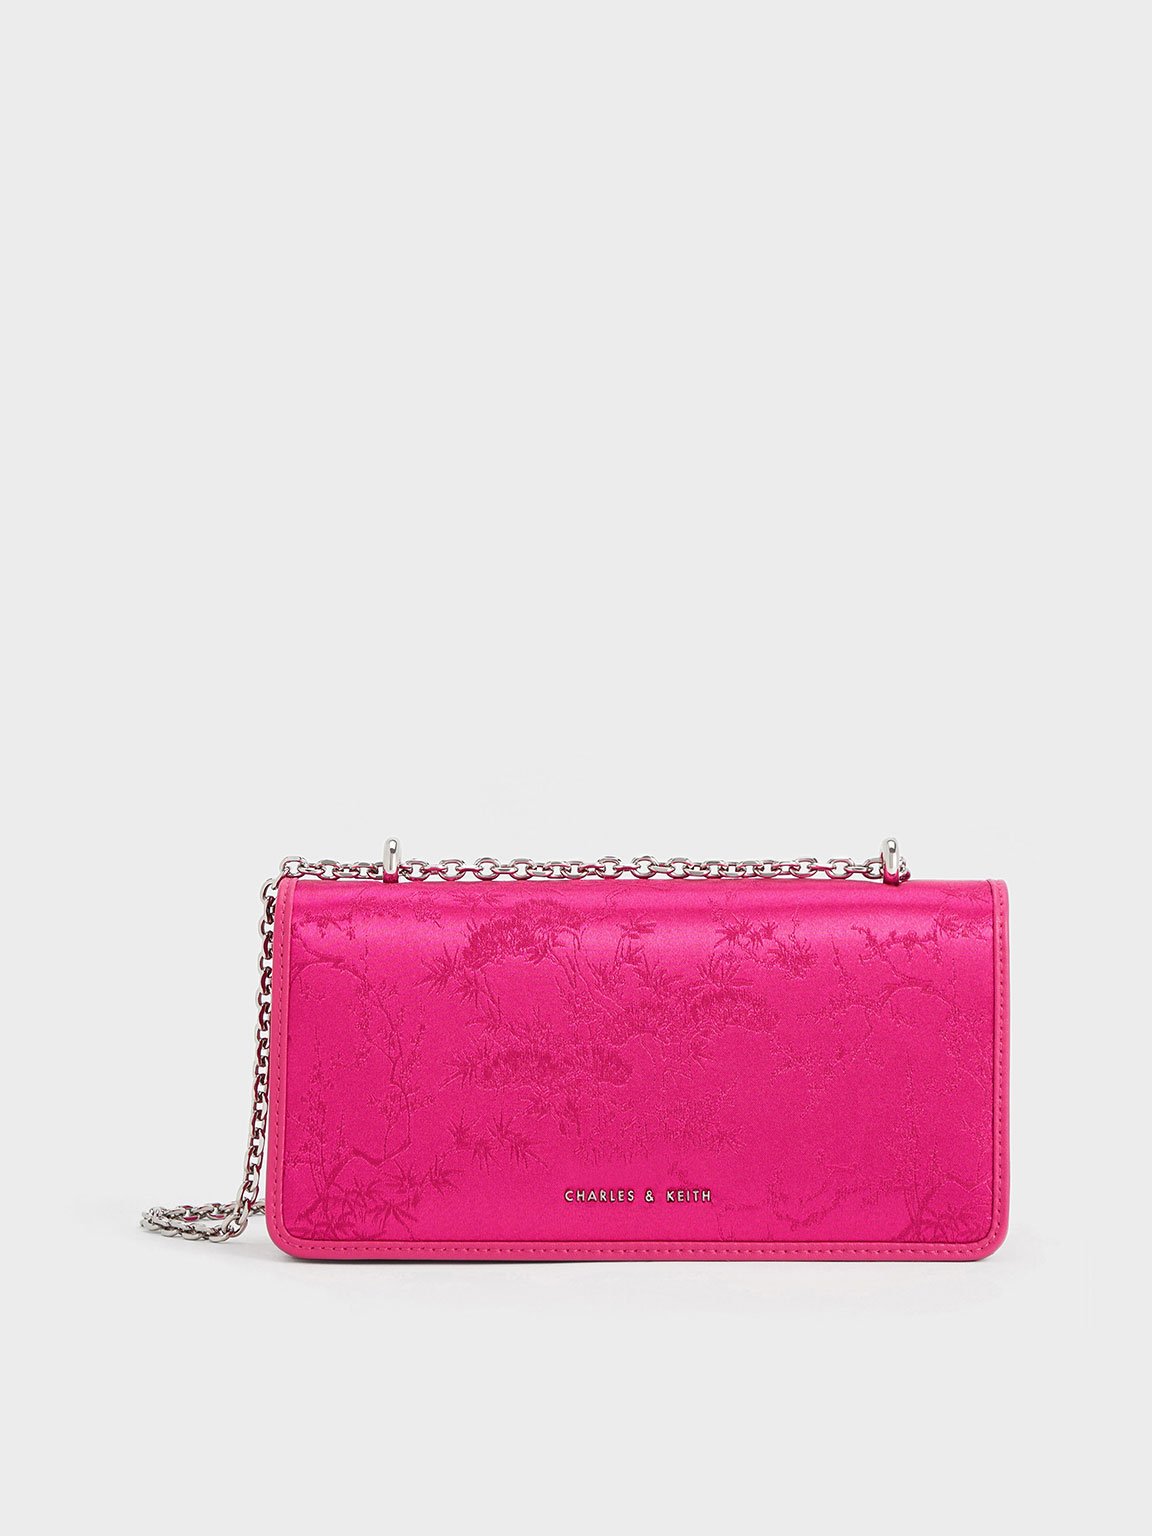 Charles & Keith Paffuto Recycled Satin Chain Handle Long Wallet In Pink